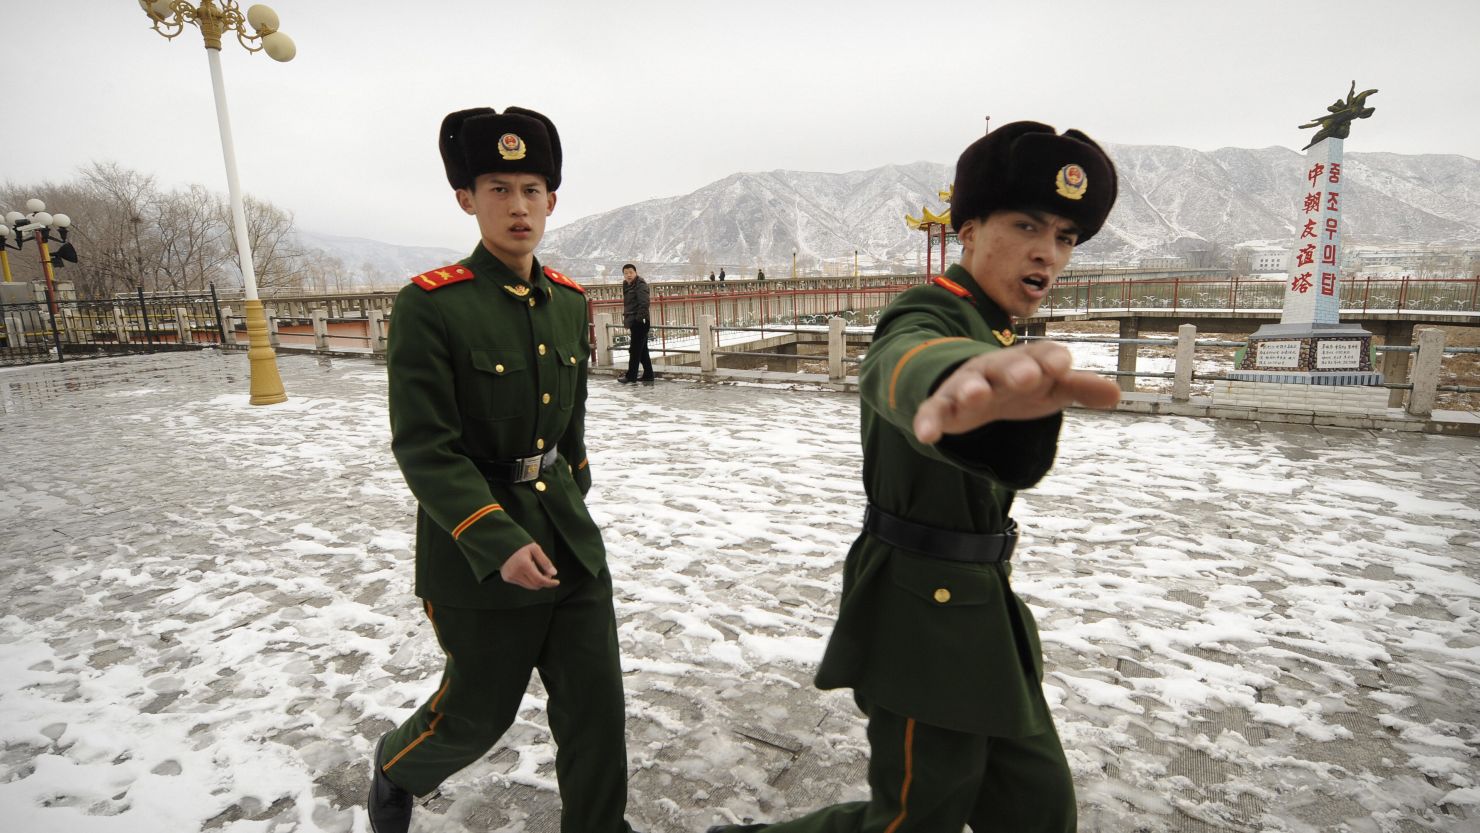 A report claims North Korea has a drug epidemic since China stepped up security on its border